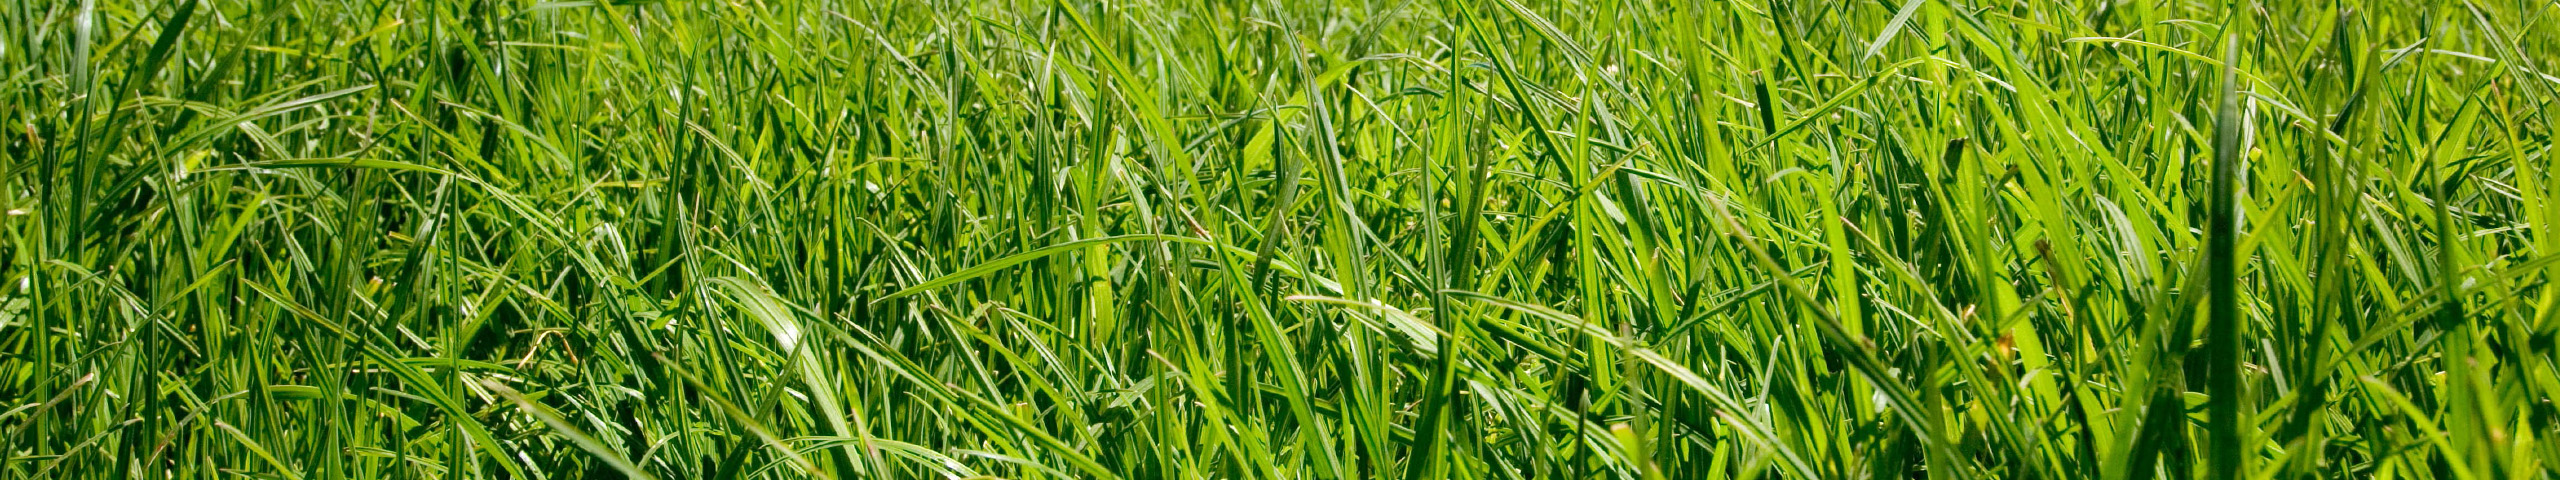 A crop of ryegrass in a paddock